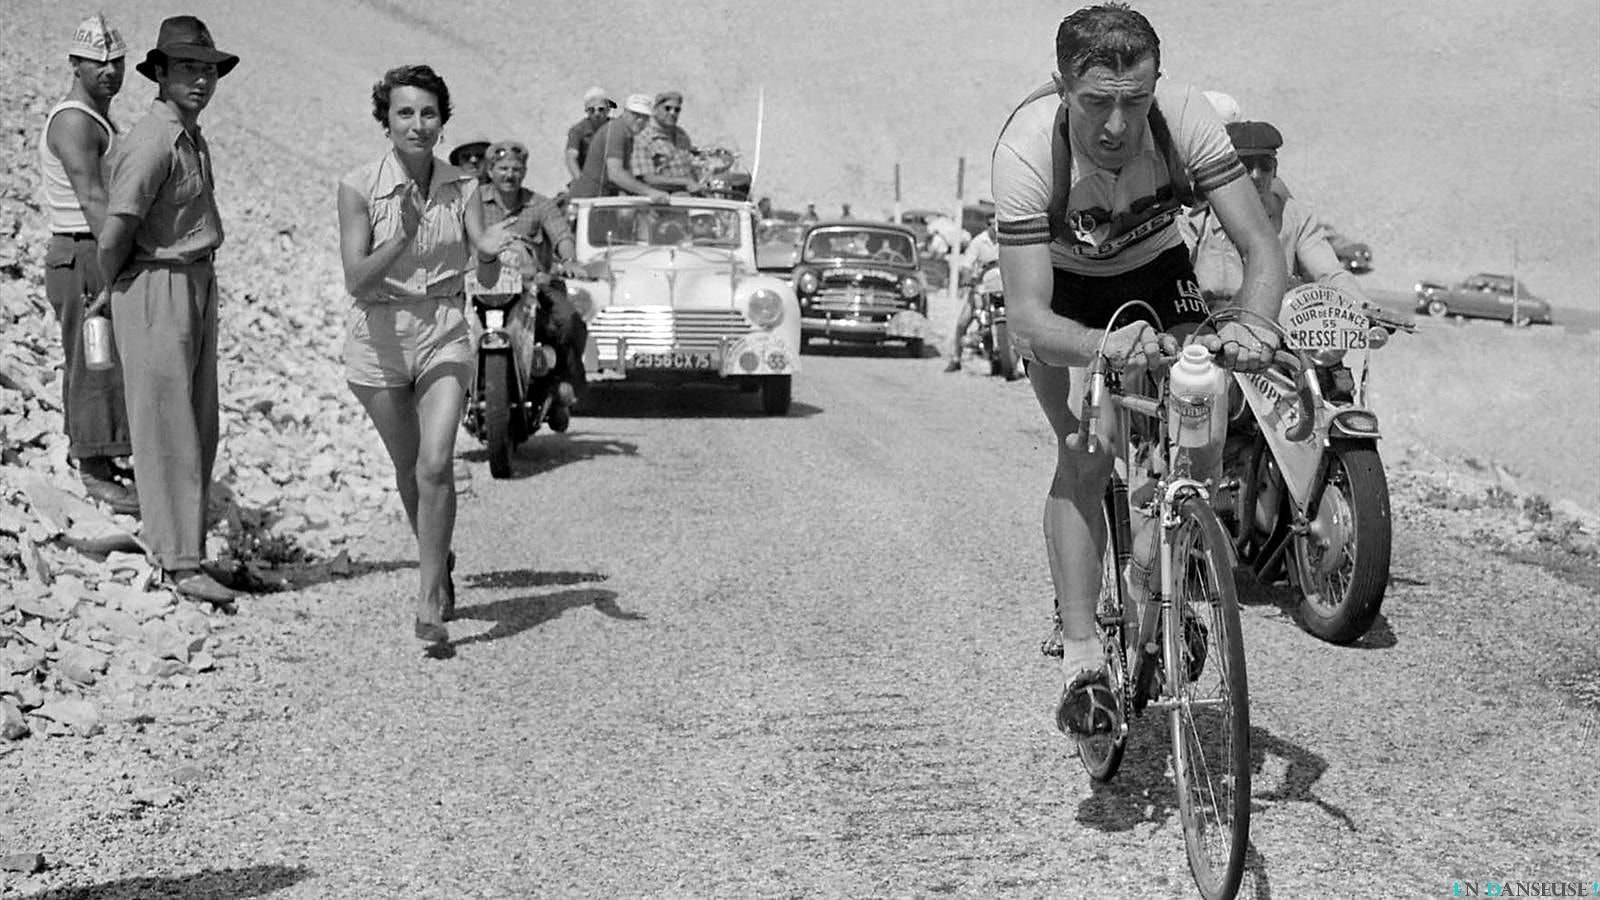 Frech multipe Tour de France winner Louison Bobet is riding solo on the mighty ascent Mont Ventoux at the Tour de Frwnce 1955. His wife Christiane is running alongside the road showing support for his husband.